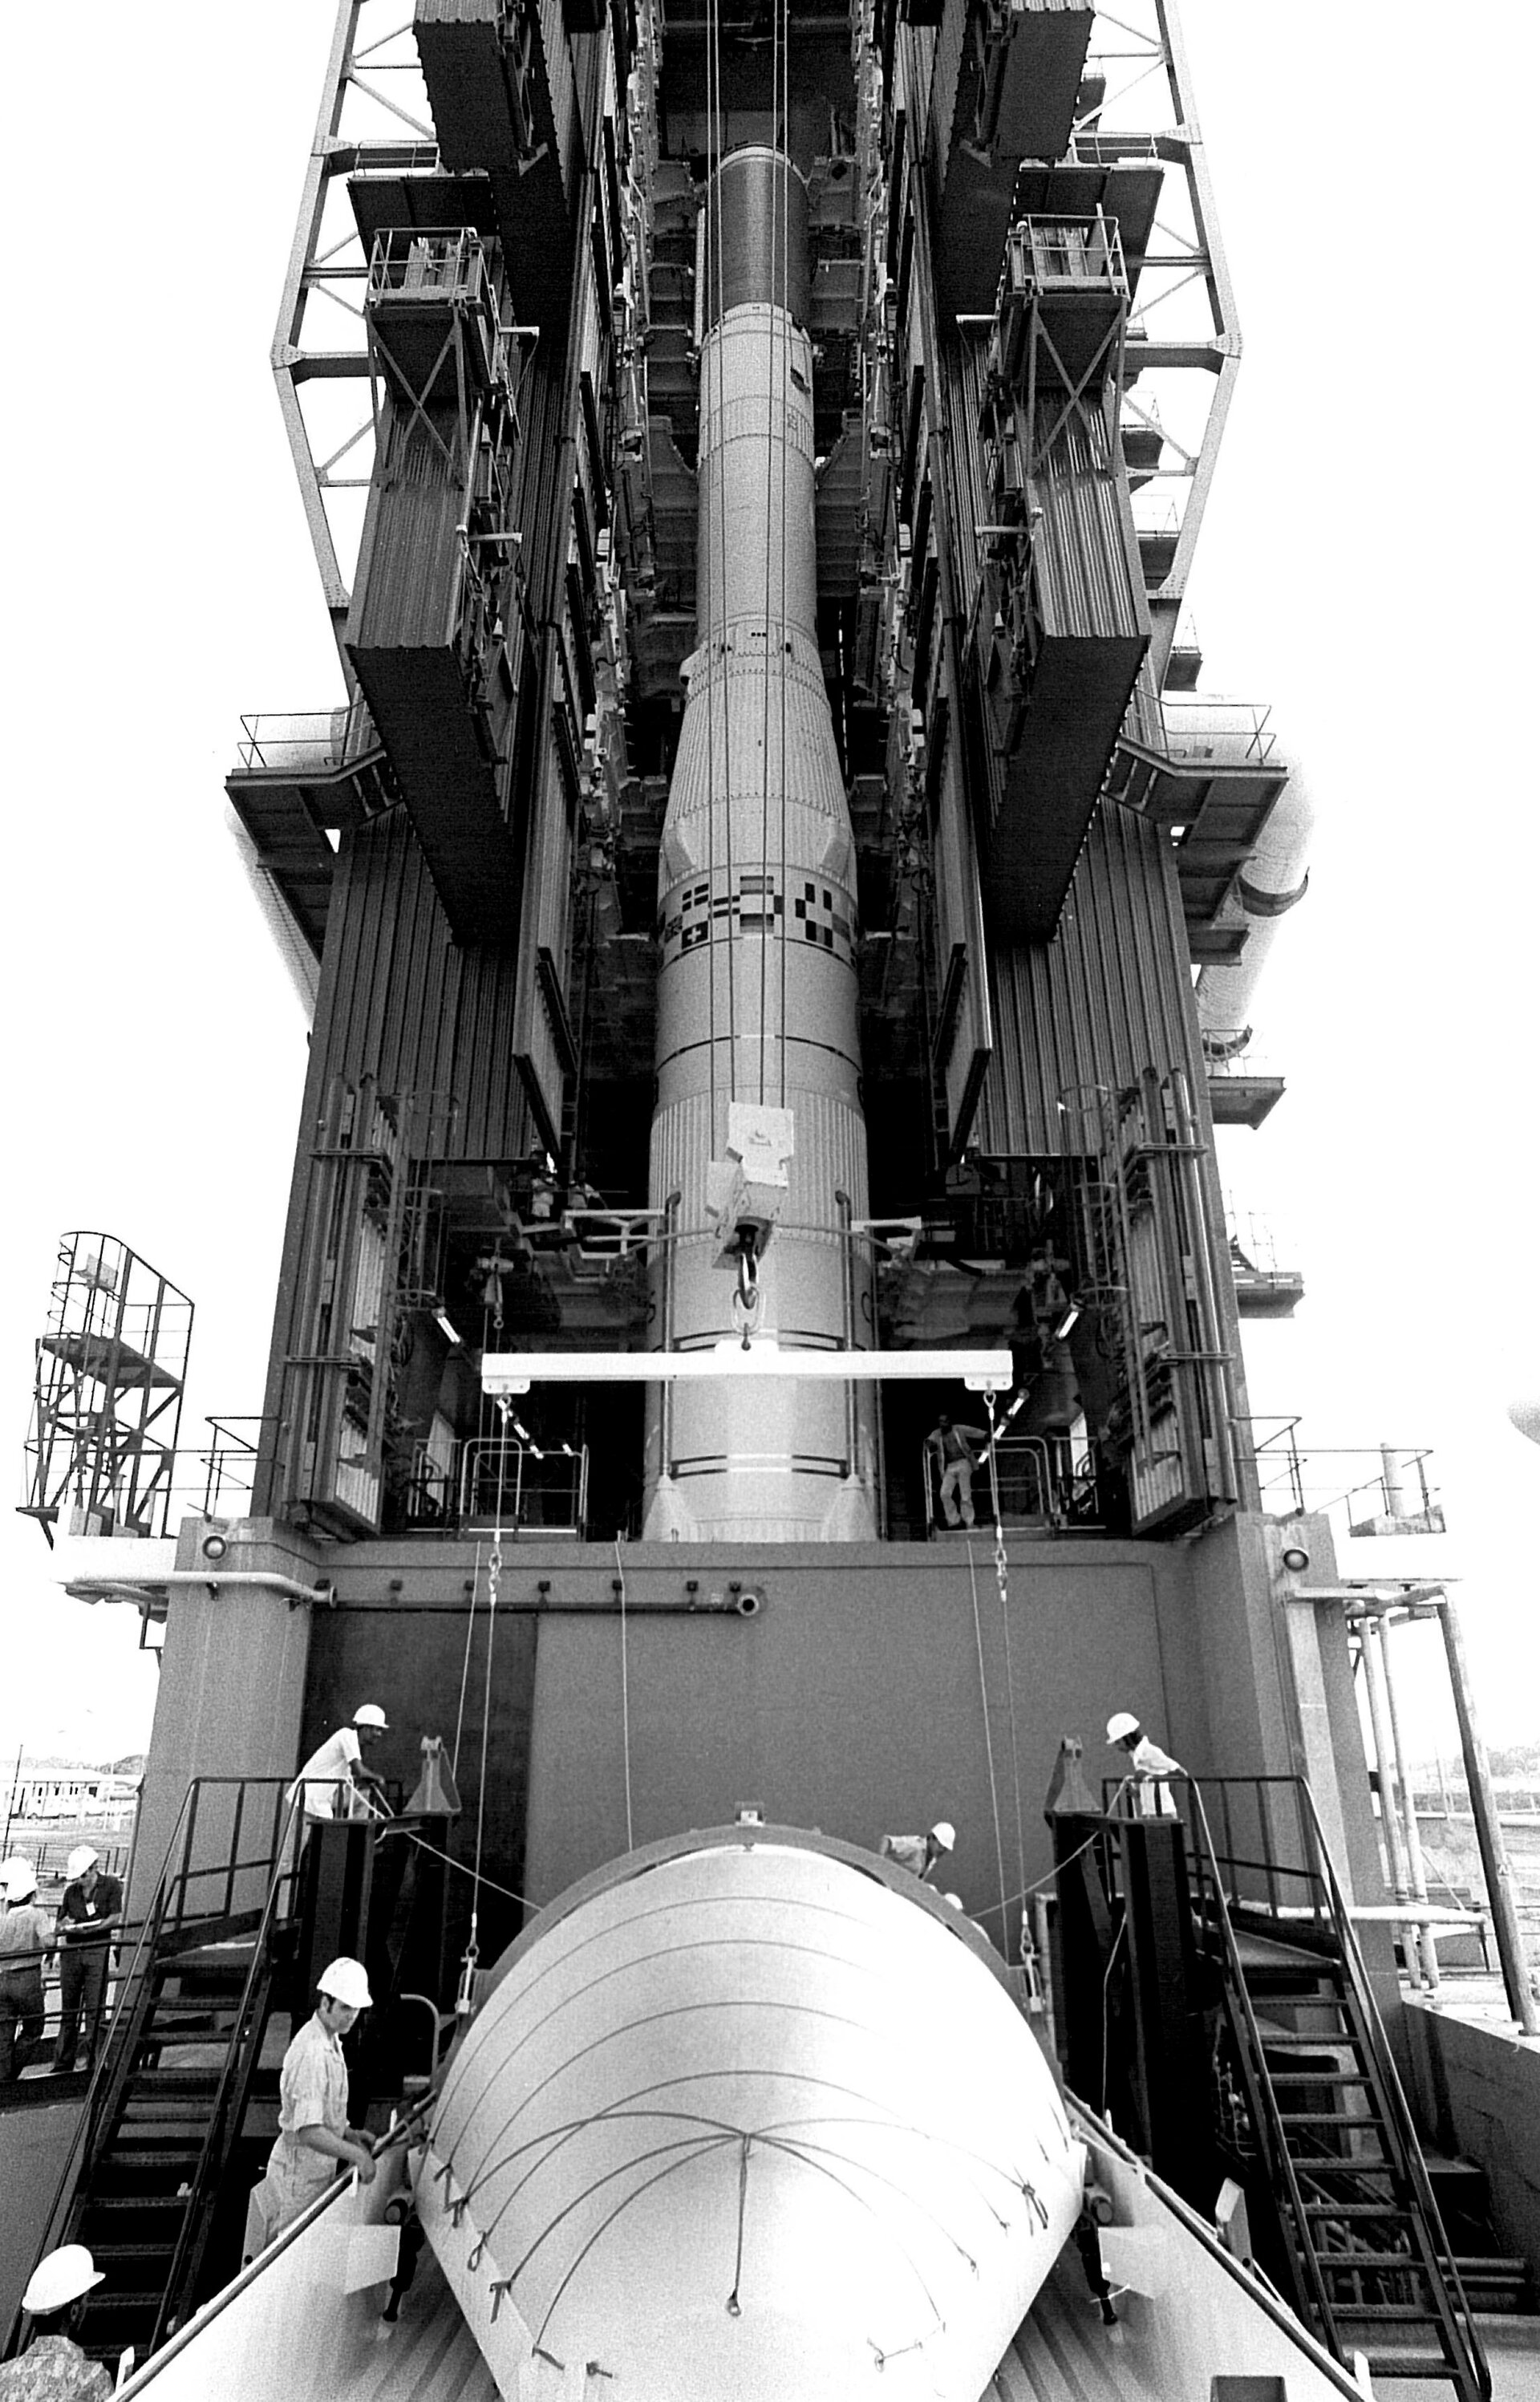 Ariane 'propellant mock-up', erected on the launch site, 1979